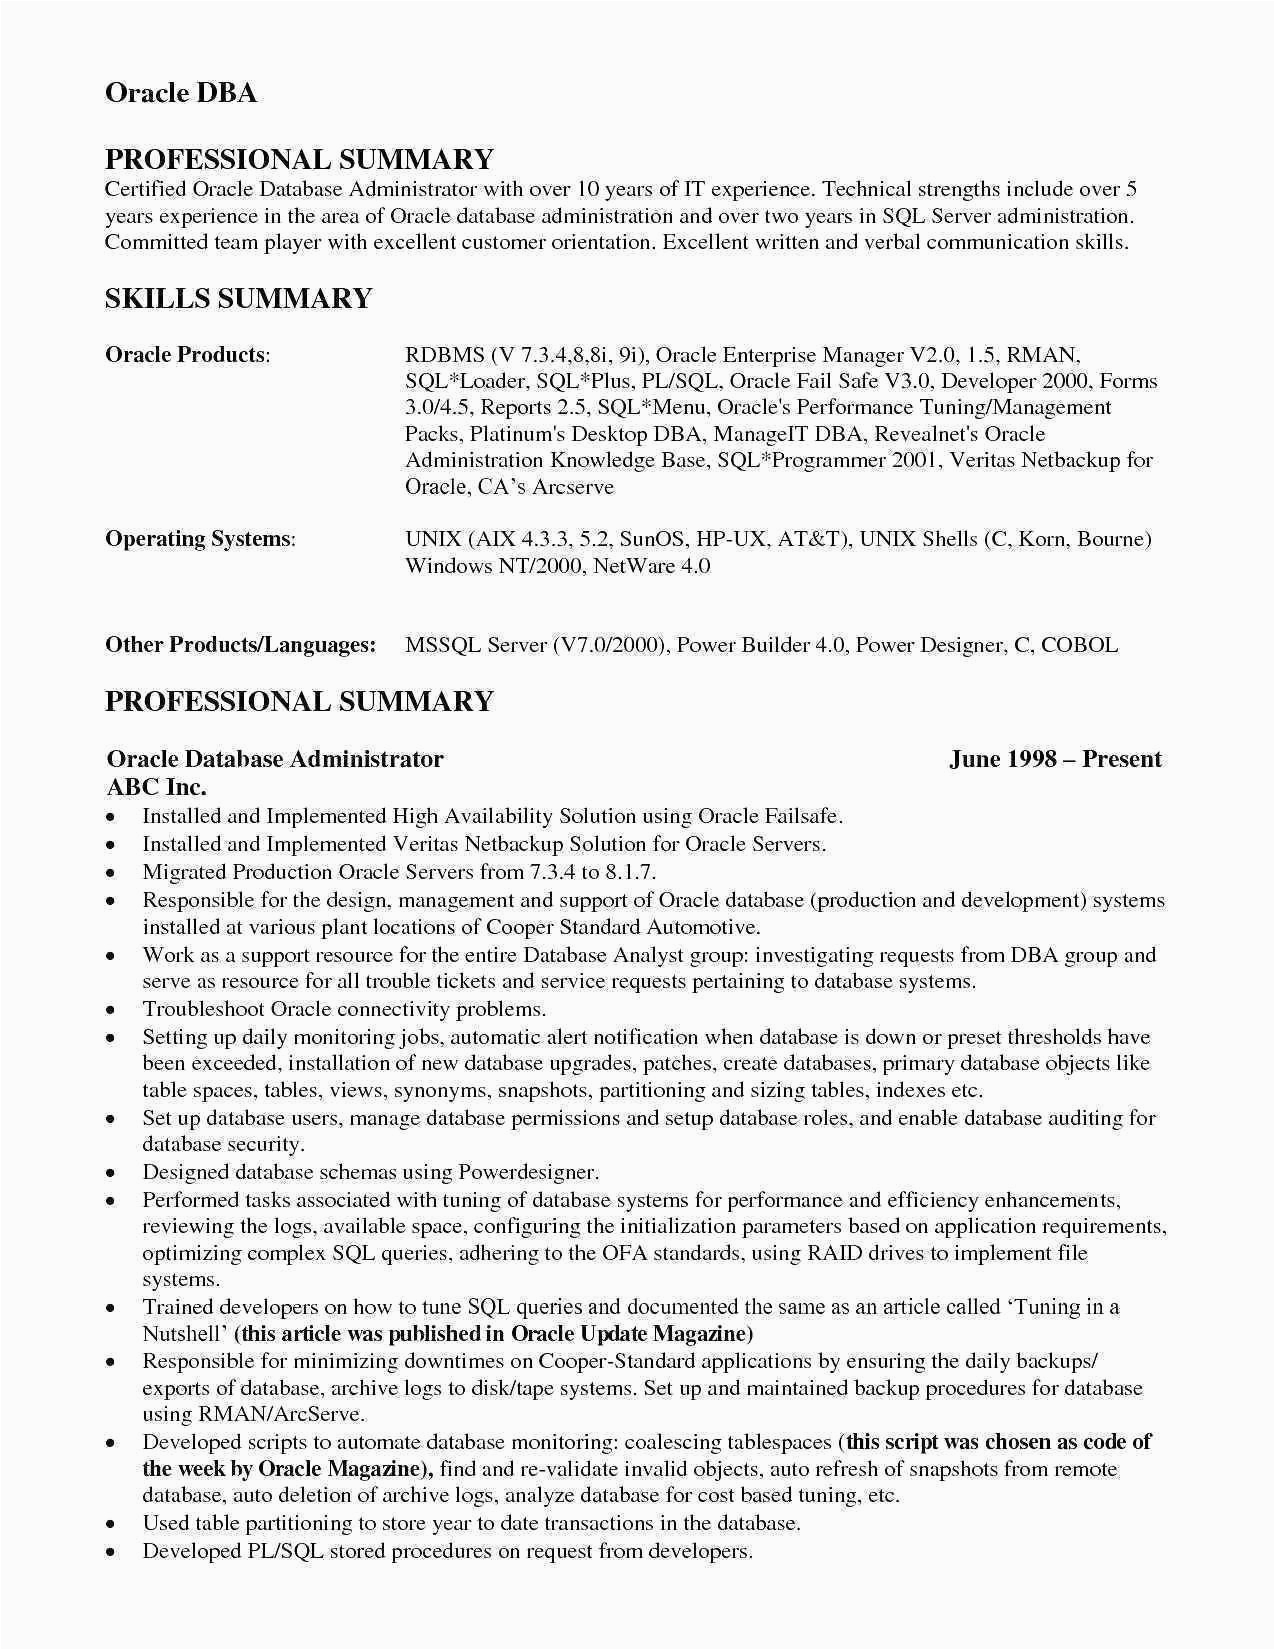 Sample Hr Resumes for 2 Years Experience Hr Resume Sample for 2 Years Experience Best Resume Examples